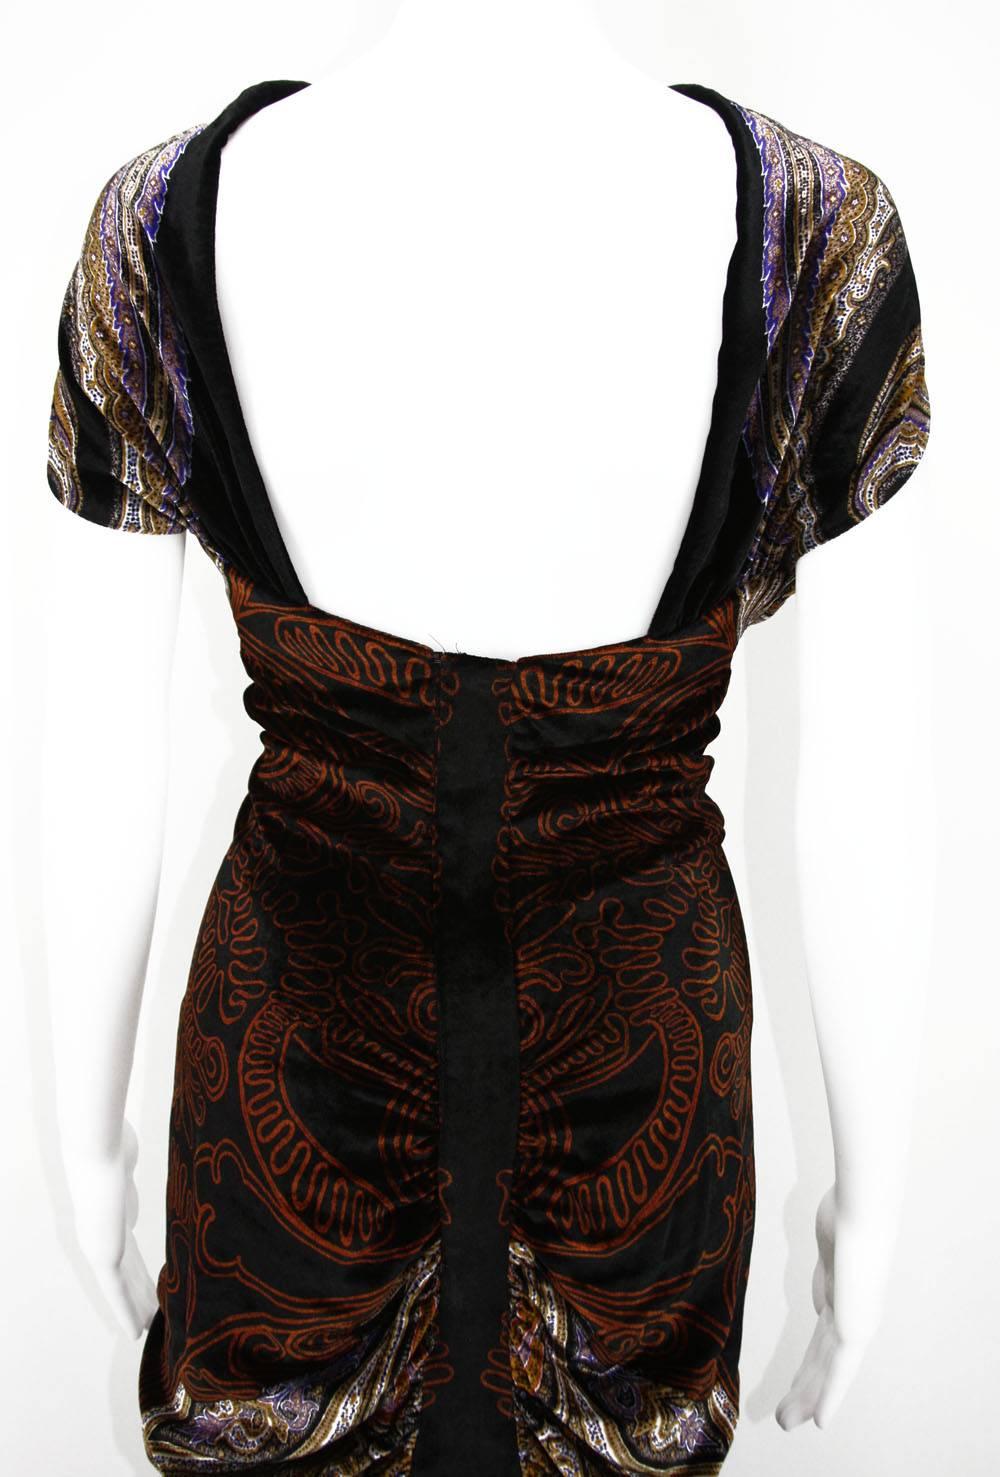 New Etro Runway Red Carpet Velvet Print Dress Gown Italian 40 - US 4 In New Condition For Sale In Montgomery, TX